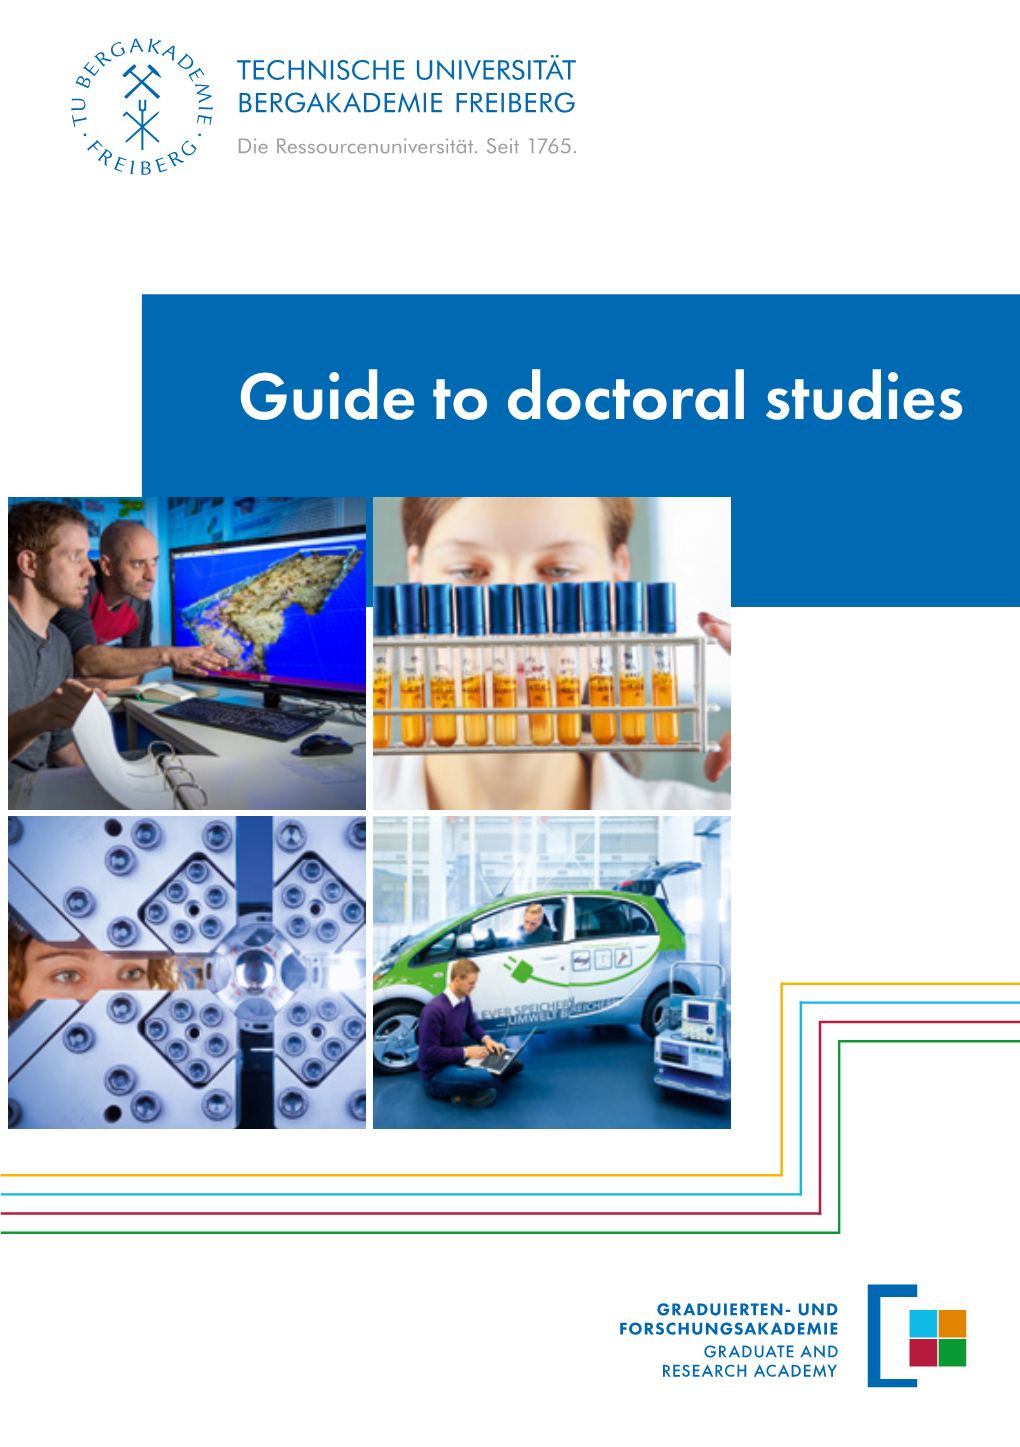 Guide to Doctoral Studies